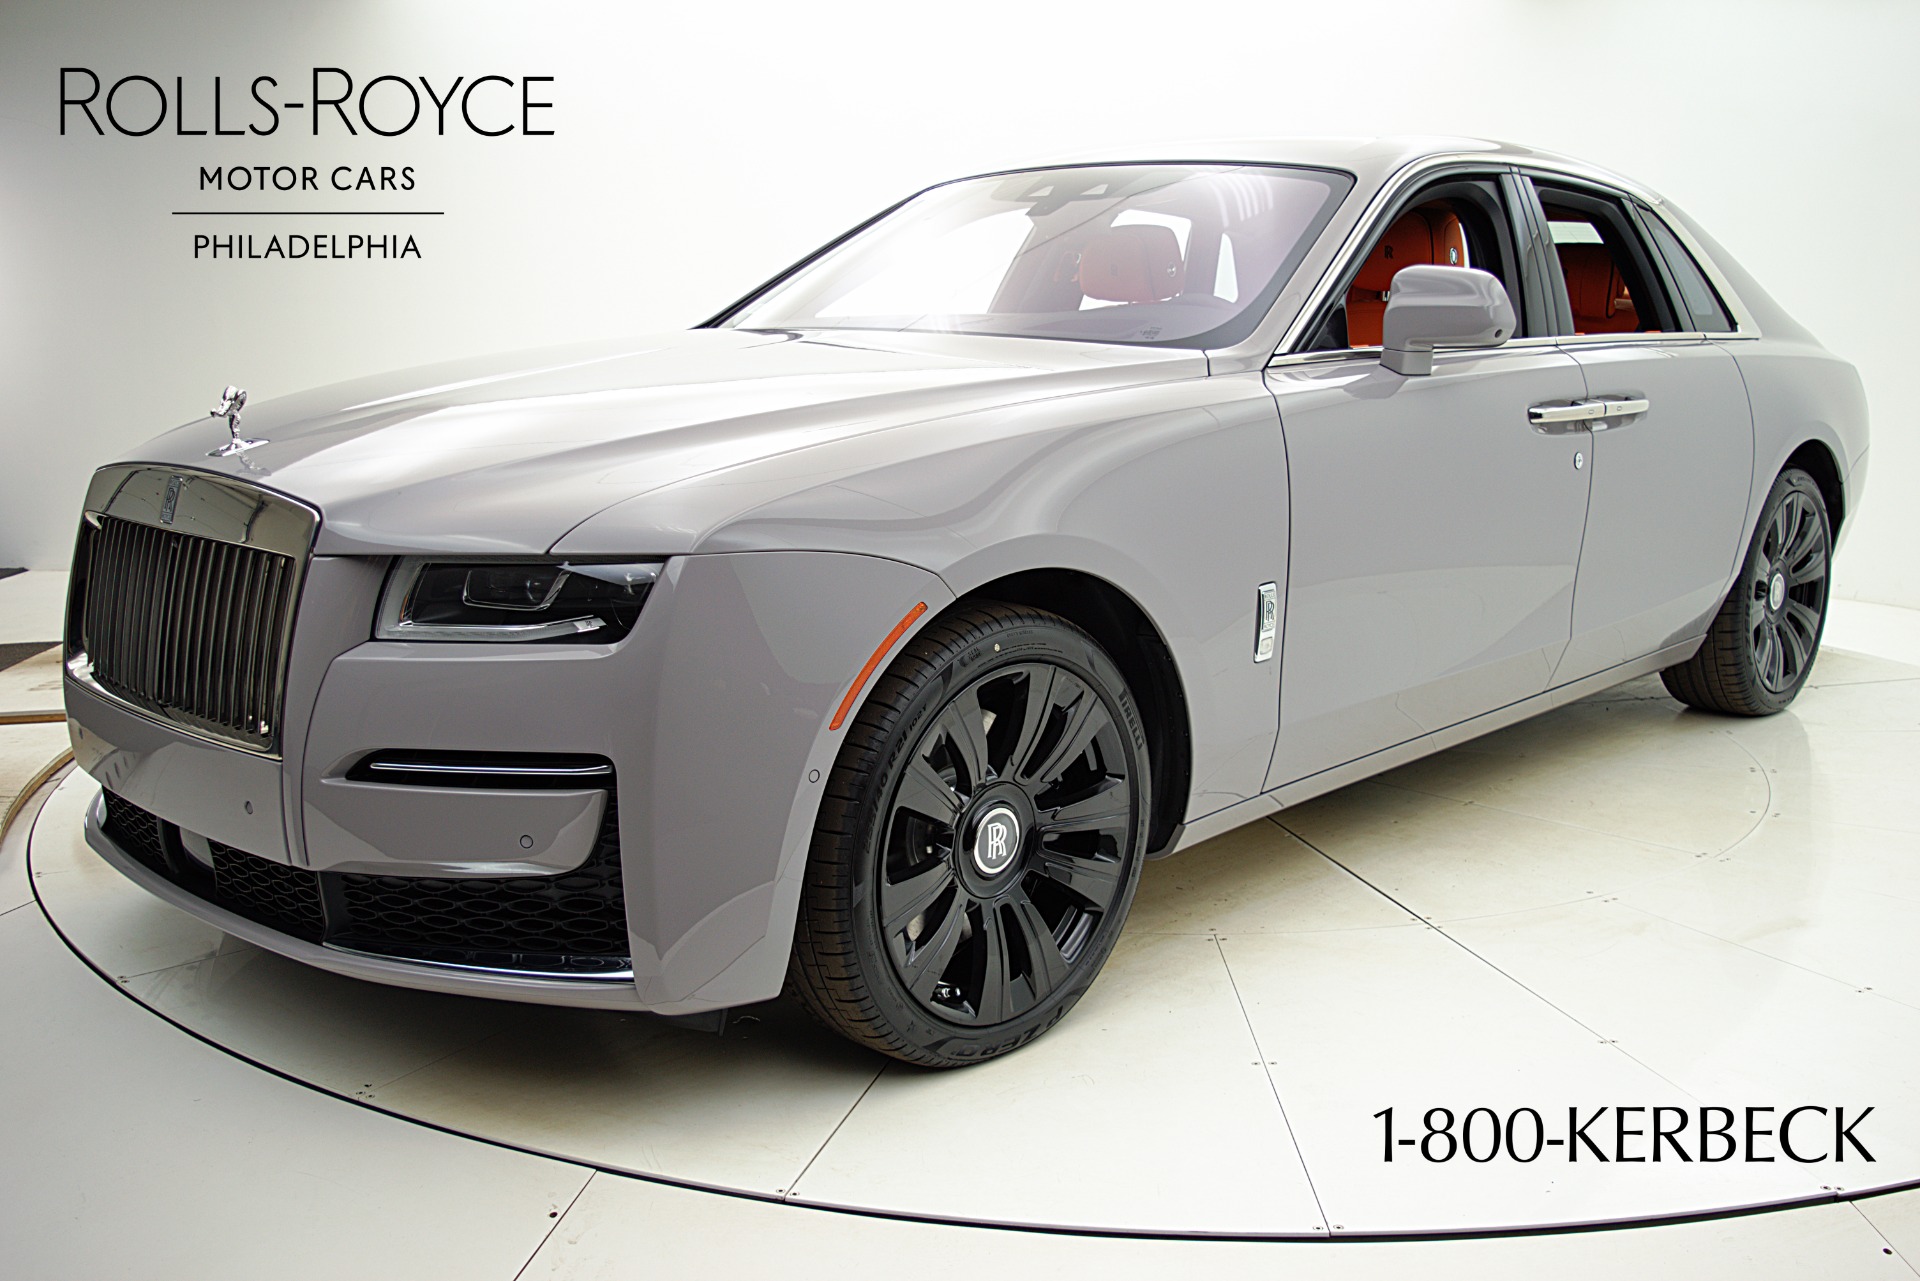 2023 Rolls-Royce Ghost Prices, Reviews, and Photos - MotorTrend